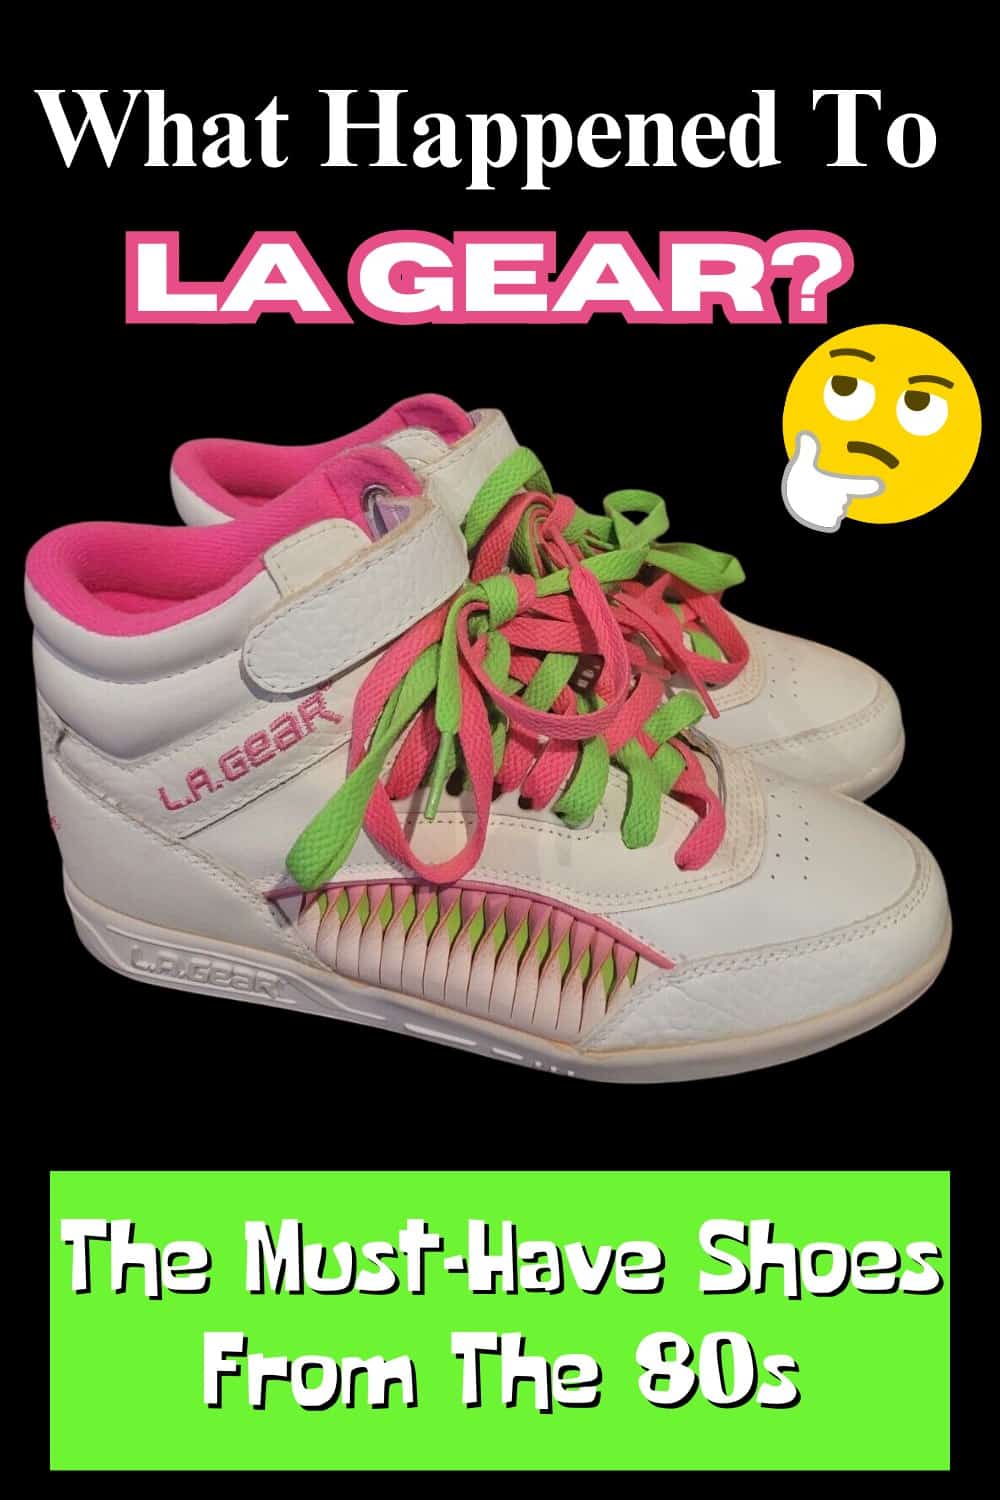 La Gear filed for Chapter 11 bankruptcy in 1998